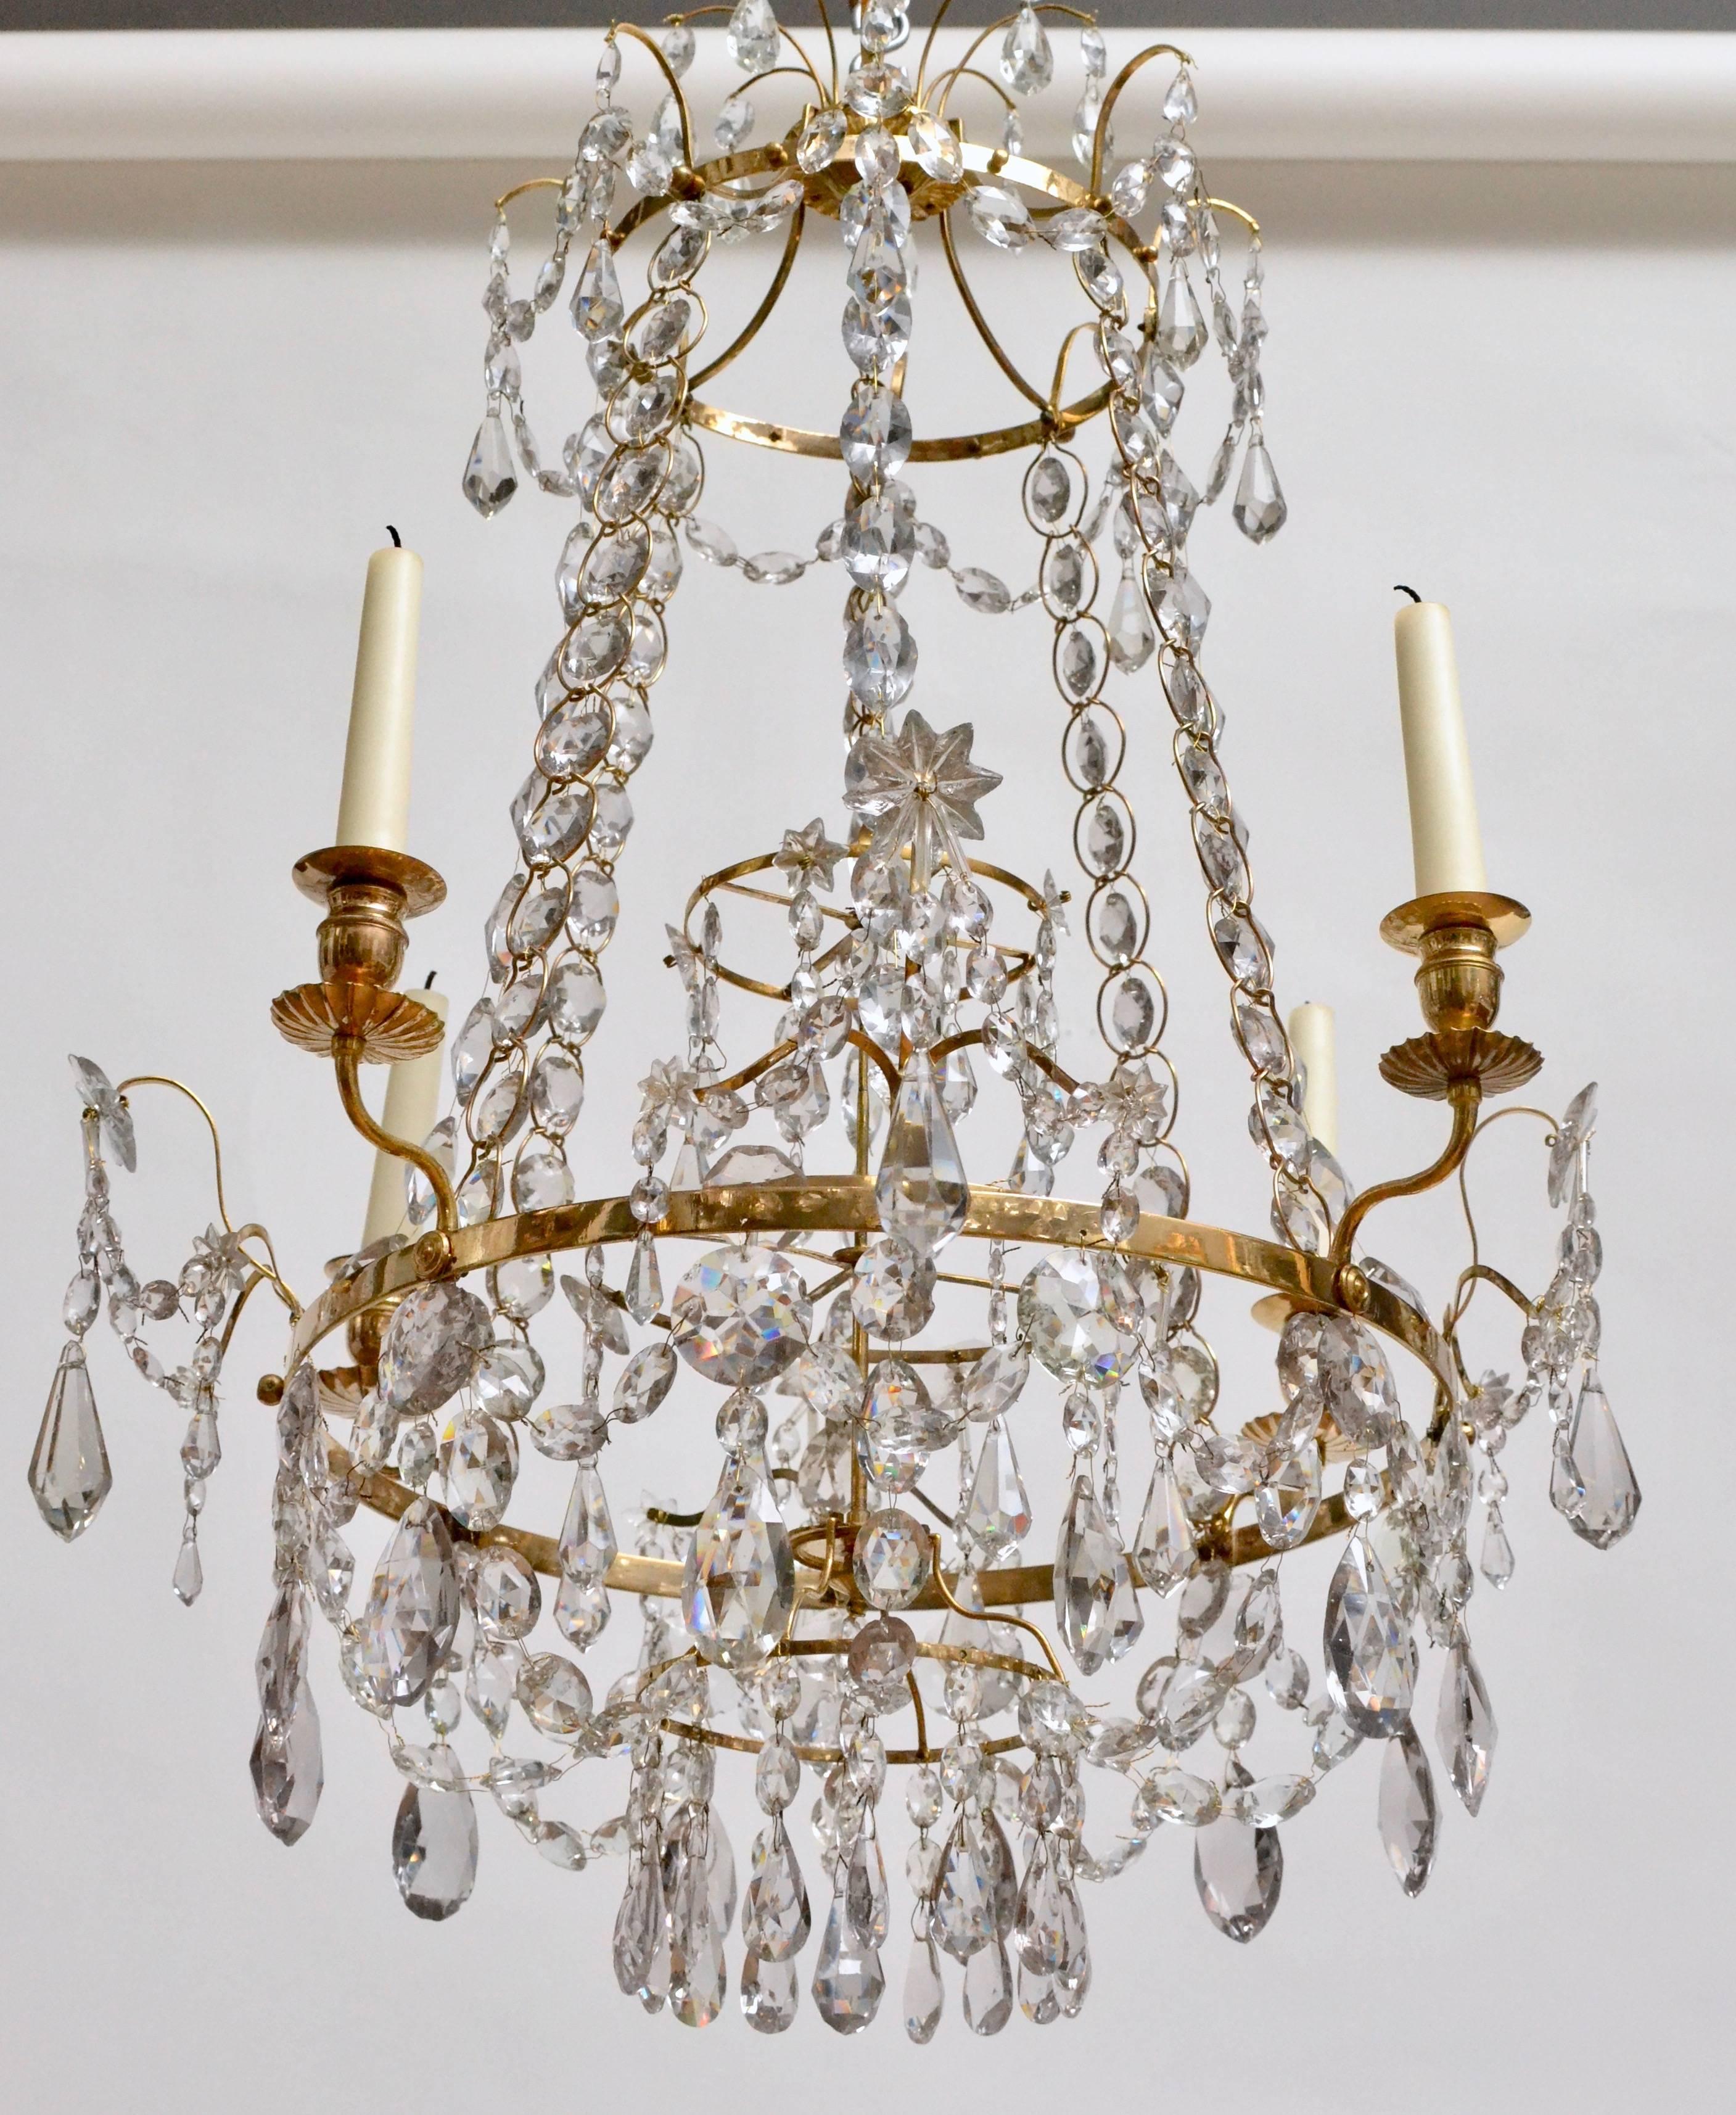 A rare Gustavian Haga chandelier attributed to Olof Westerberg (1750-1817); Stockholm. Gilt bronze and crystals.